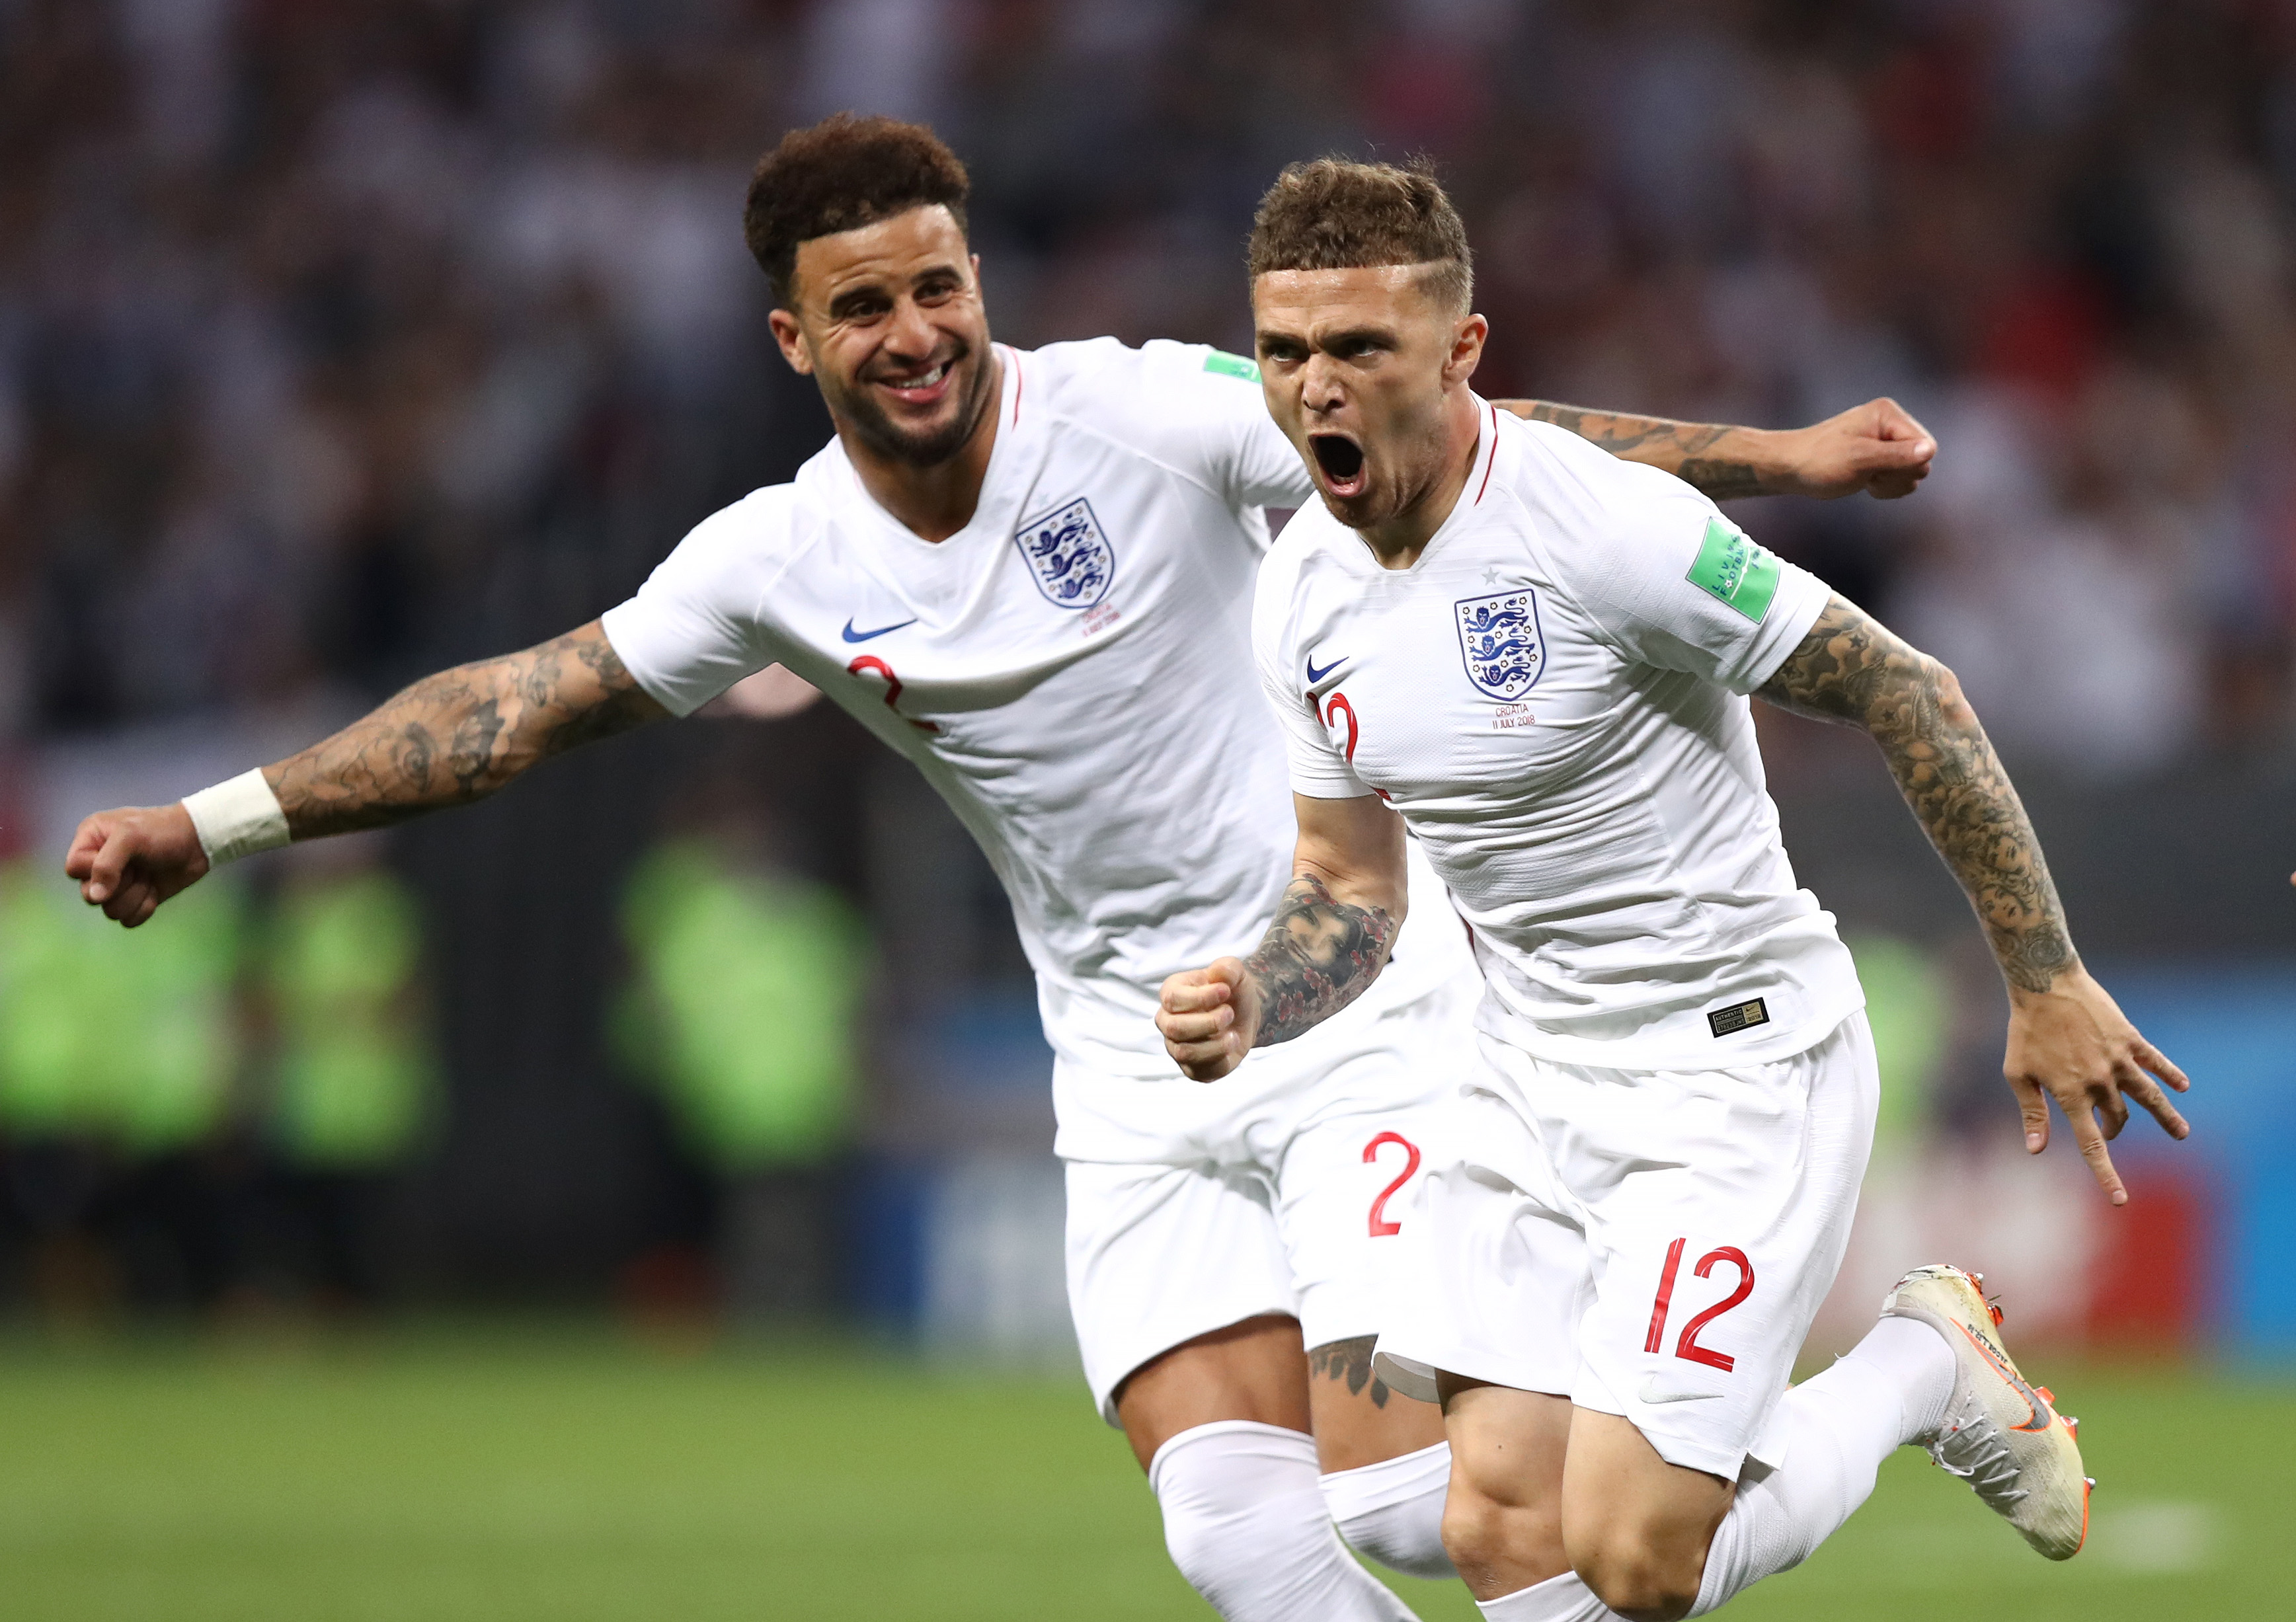 MOSCOW, RUSSIA - JULY 11:  Kieran Trippier of England celebrates with team mate Kyle Walker after scoring his team's first goal  during the 2018 FIFA World Cup Russia Semi Final match between England and Croatia at Luzhniki Stadium on July 11, 2018 in Moscow, Russia.  (Photo by Ryan Pierse/Getty Images)